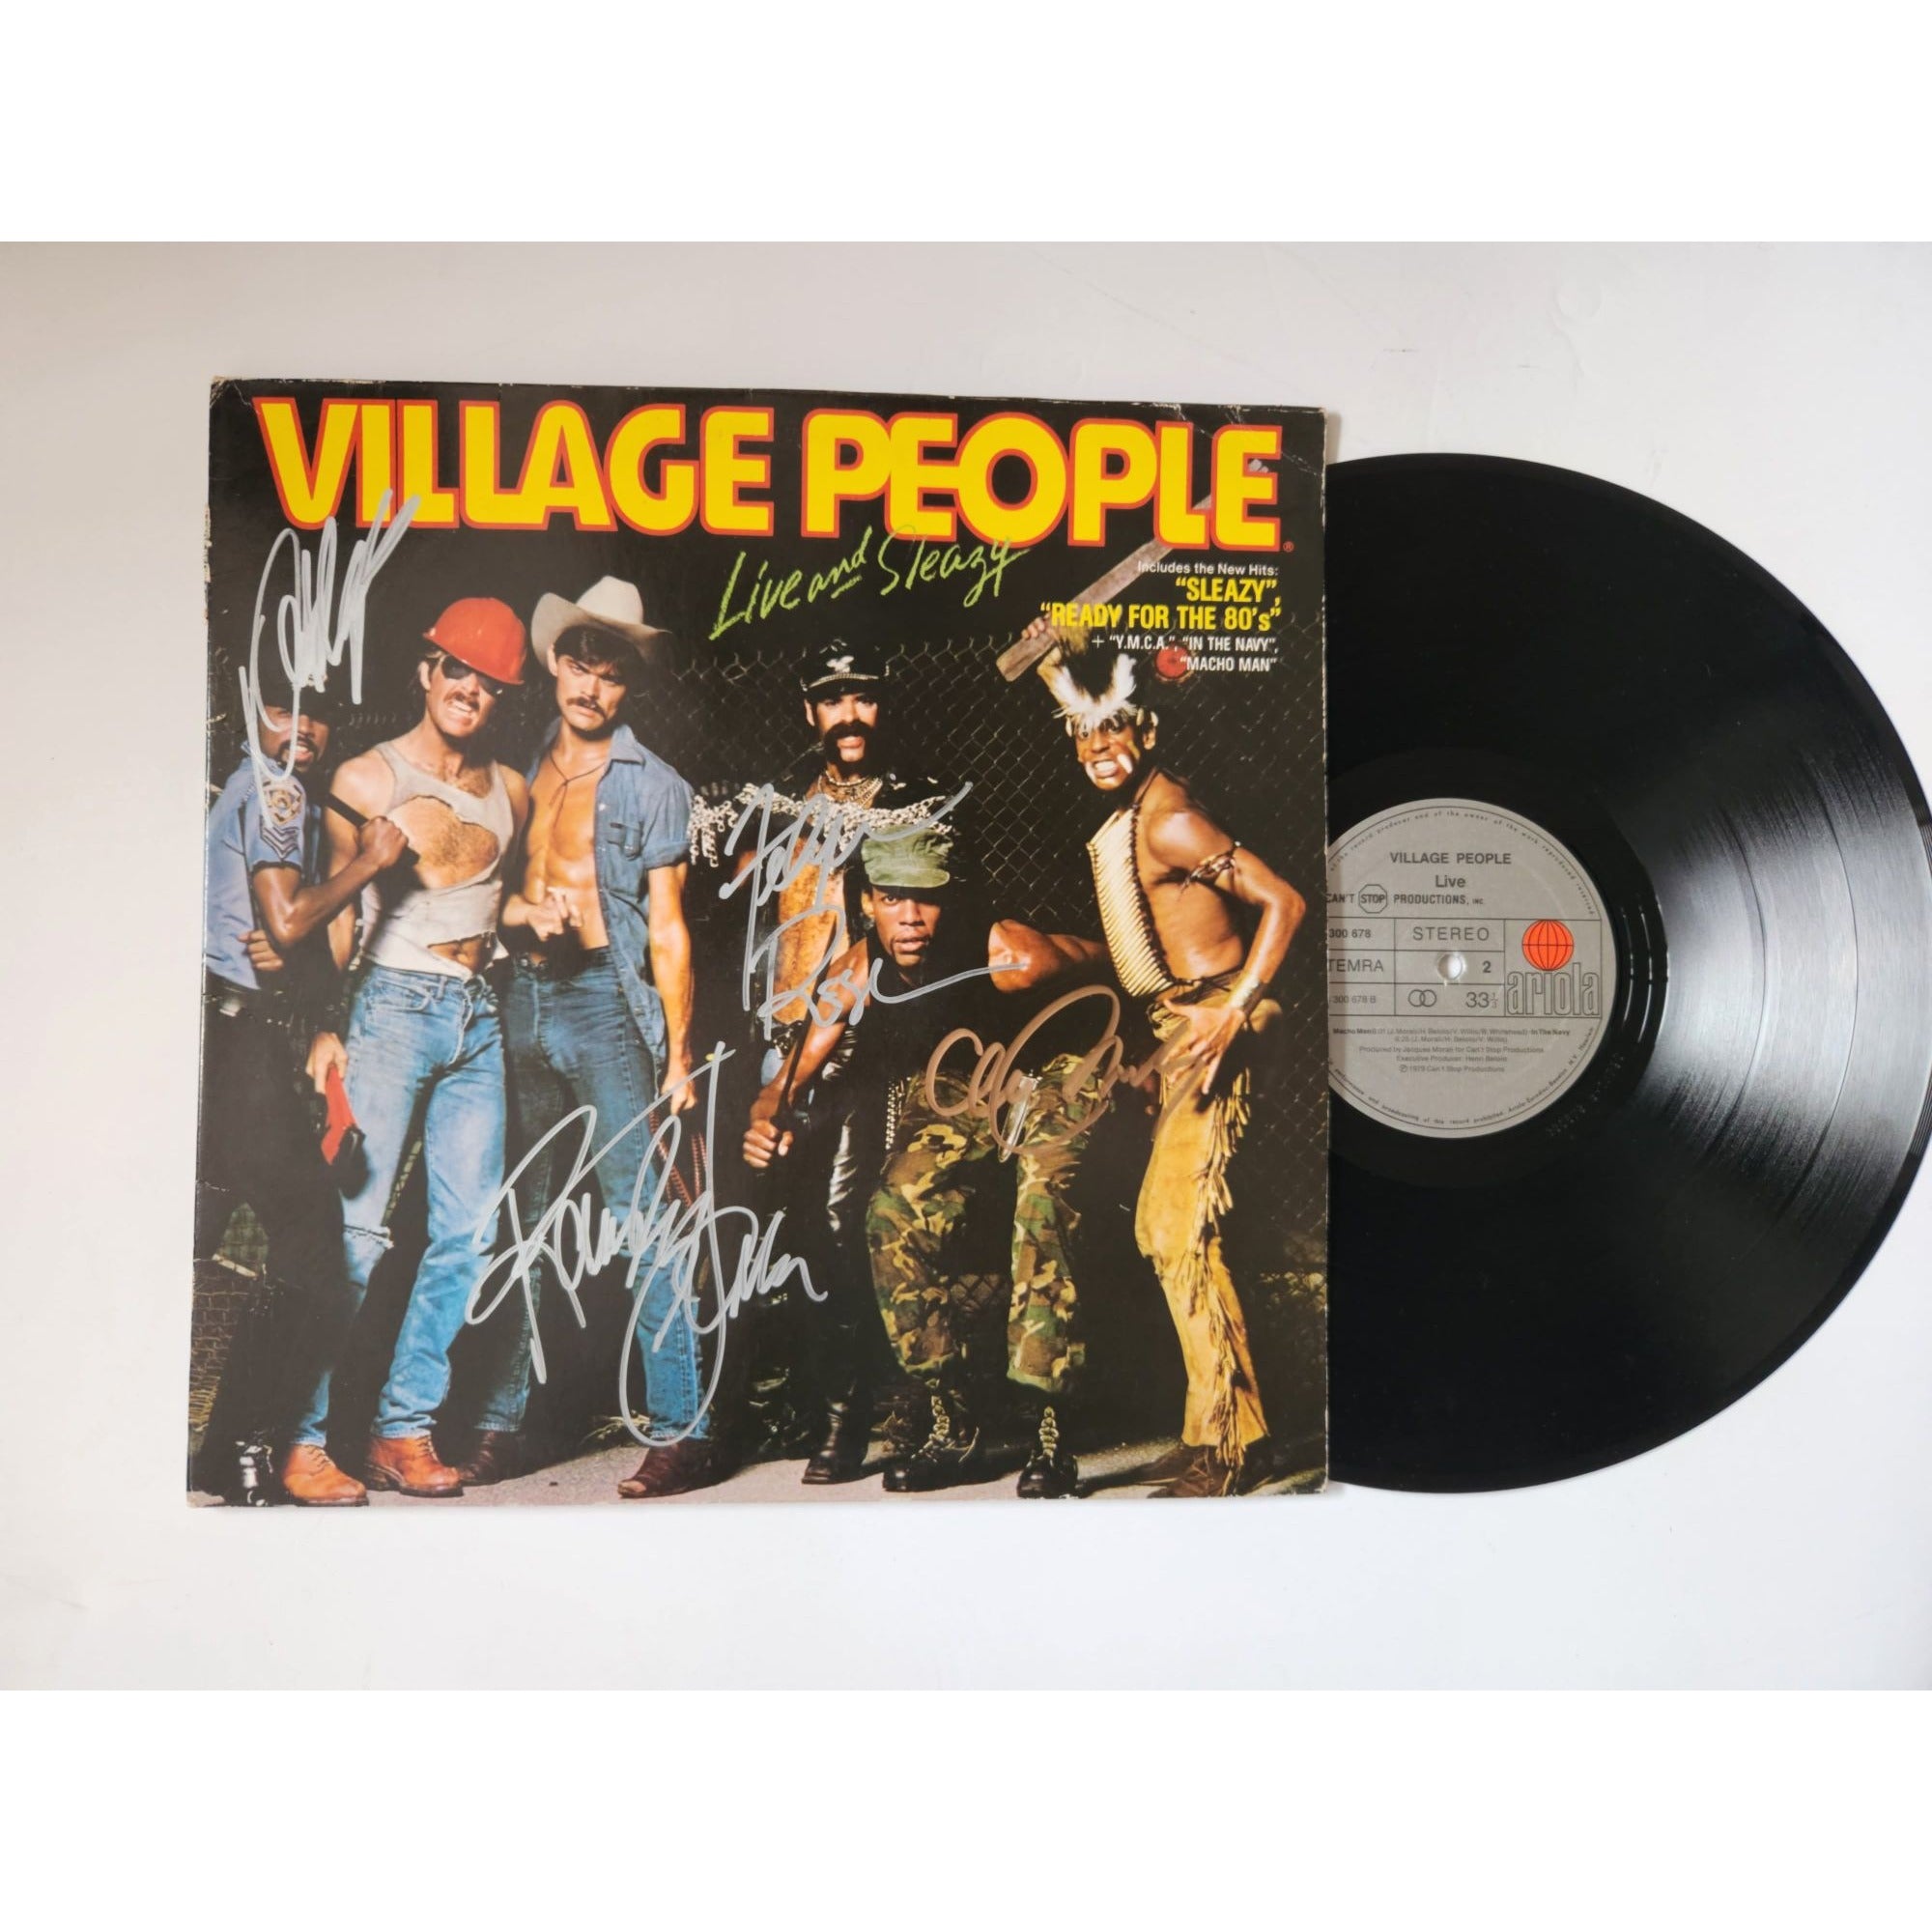 The Village People sleazy ready for the '80s lp signed